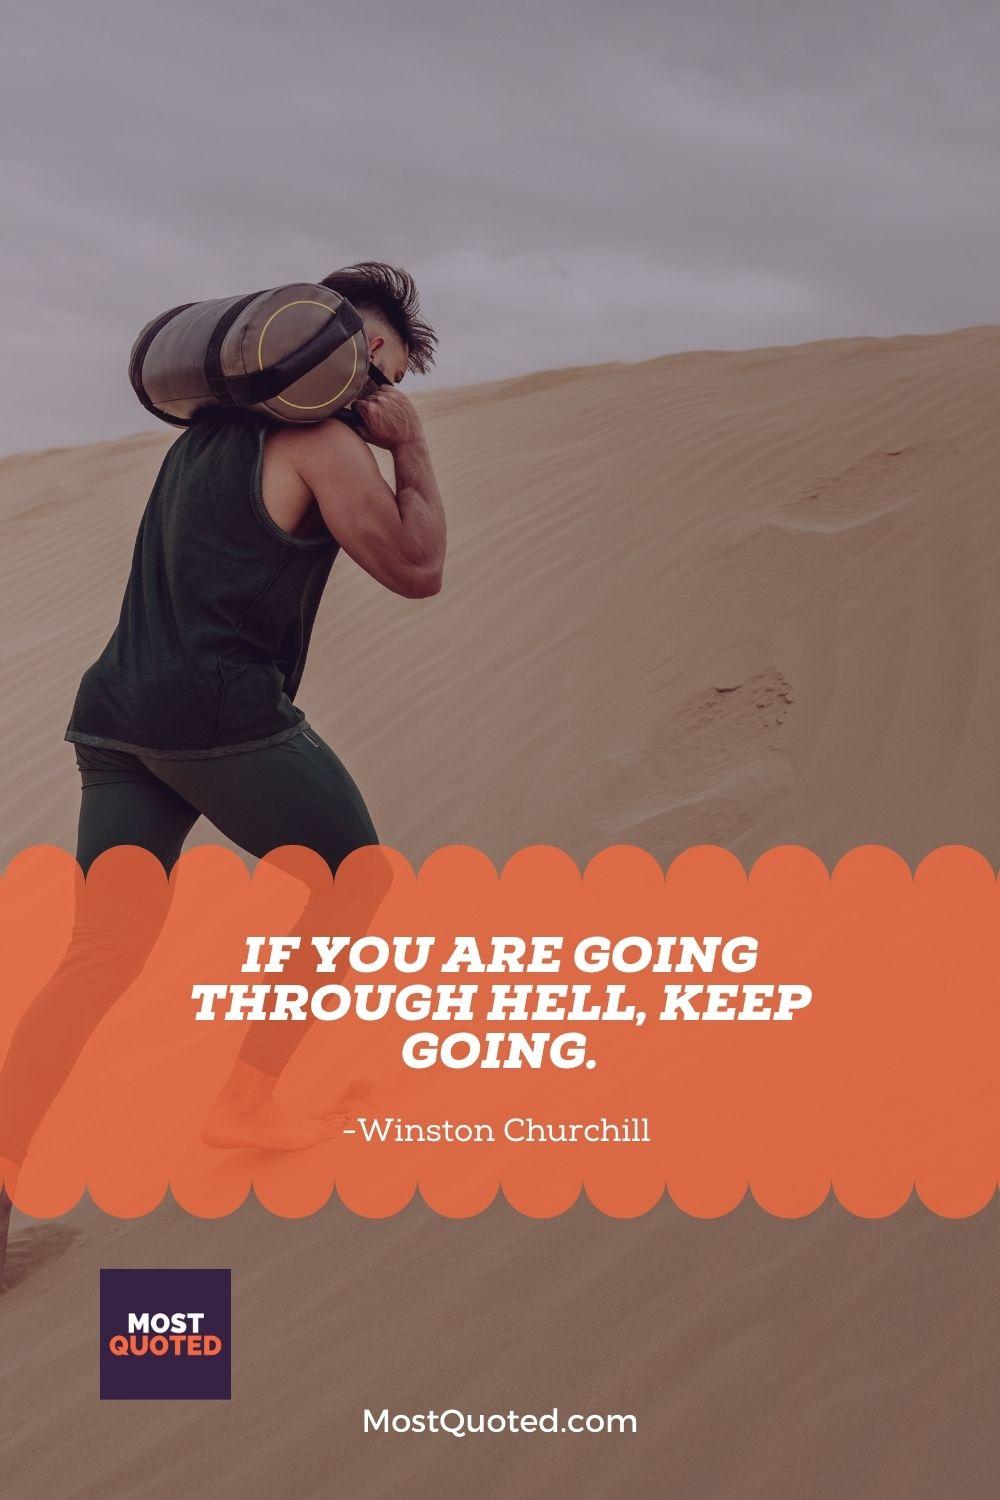 If you are going through hell, keep going. - Winston Churchill